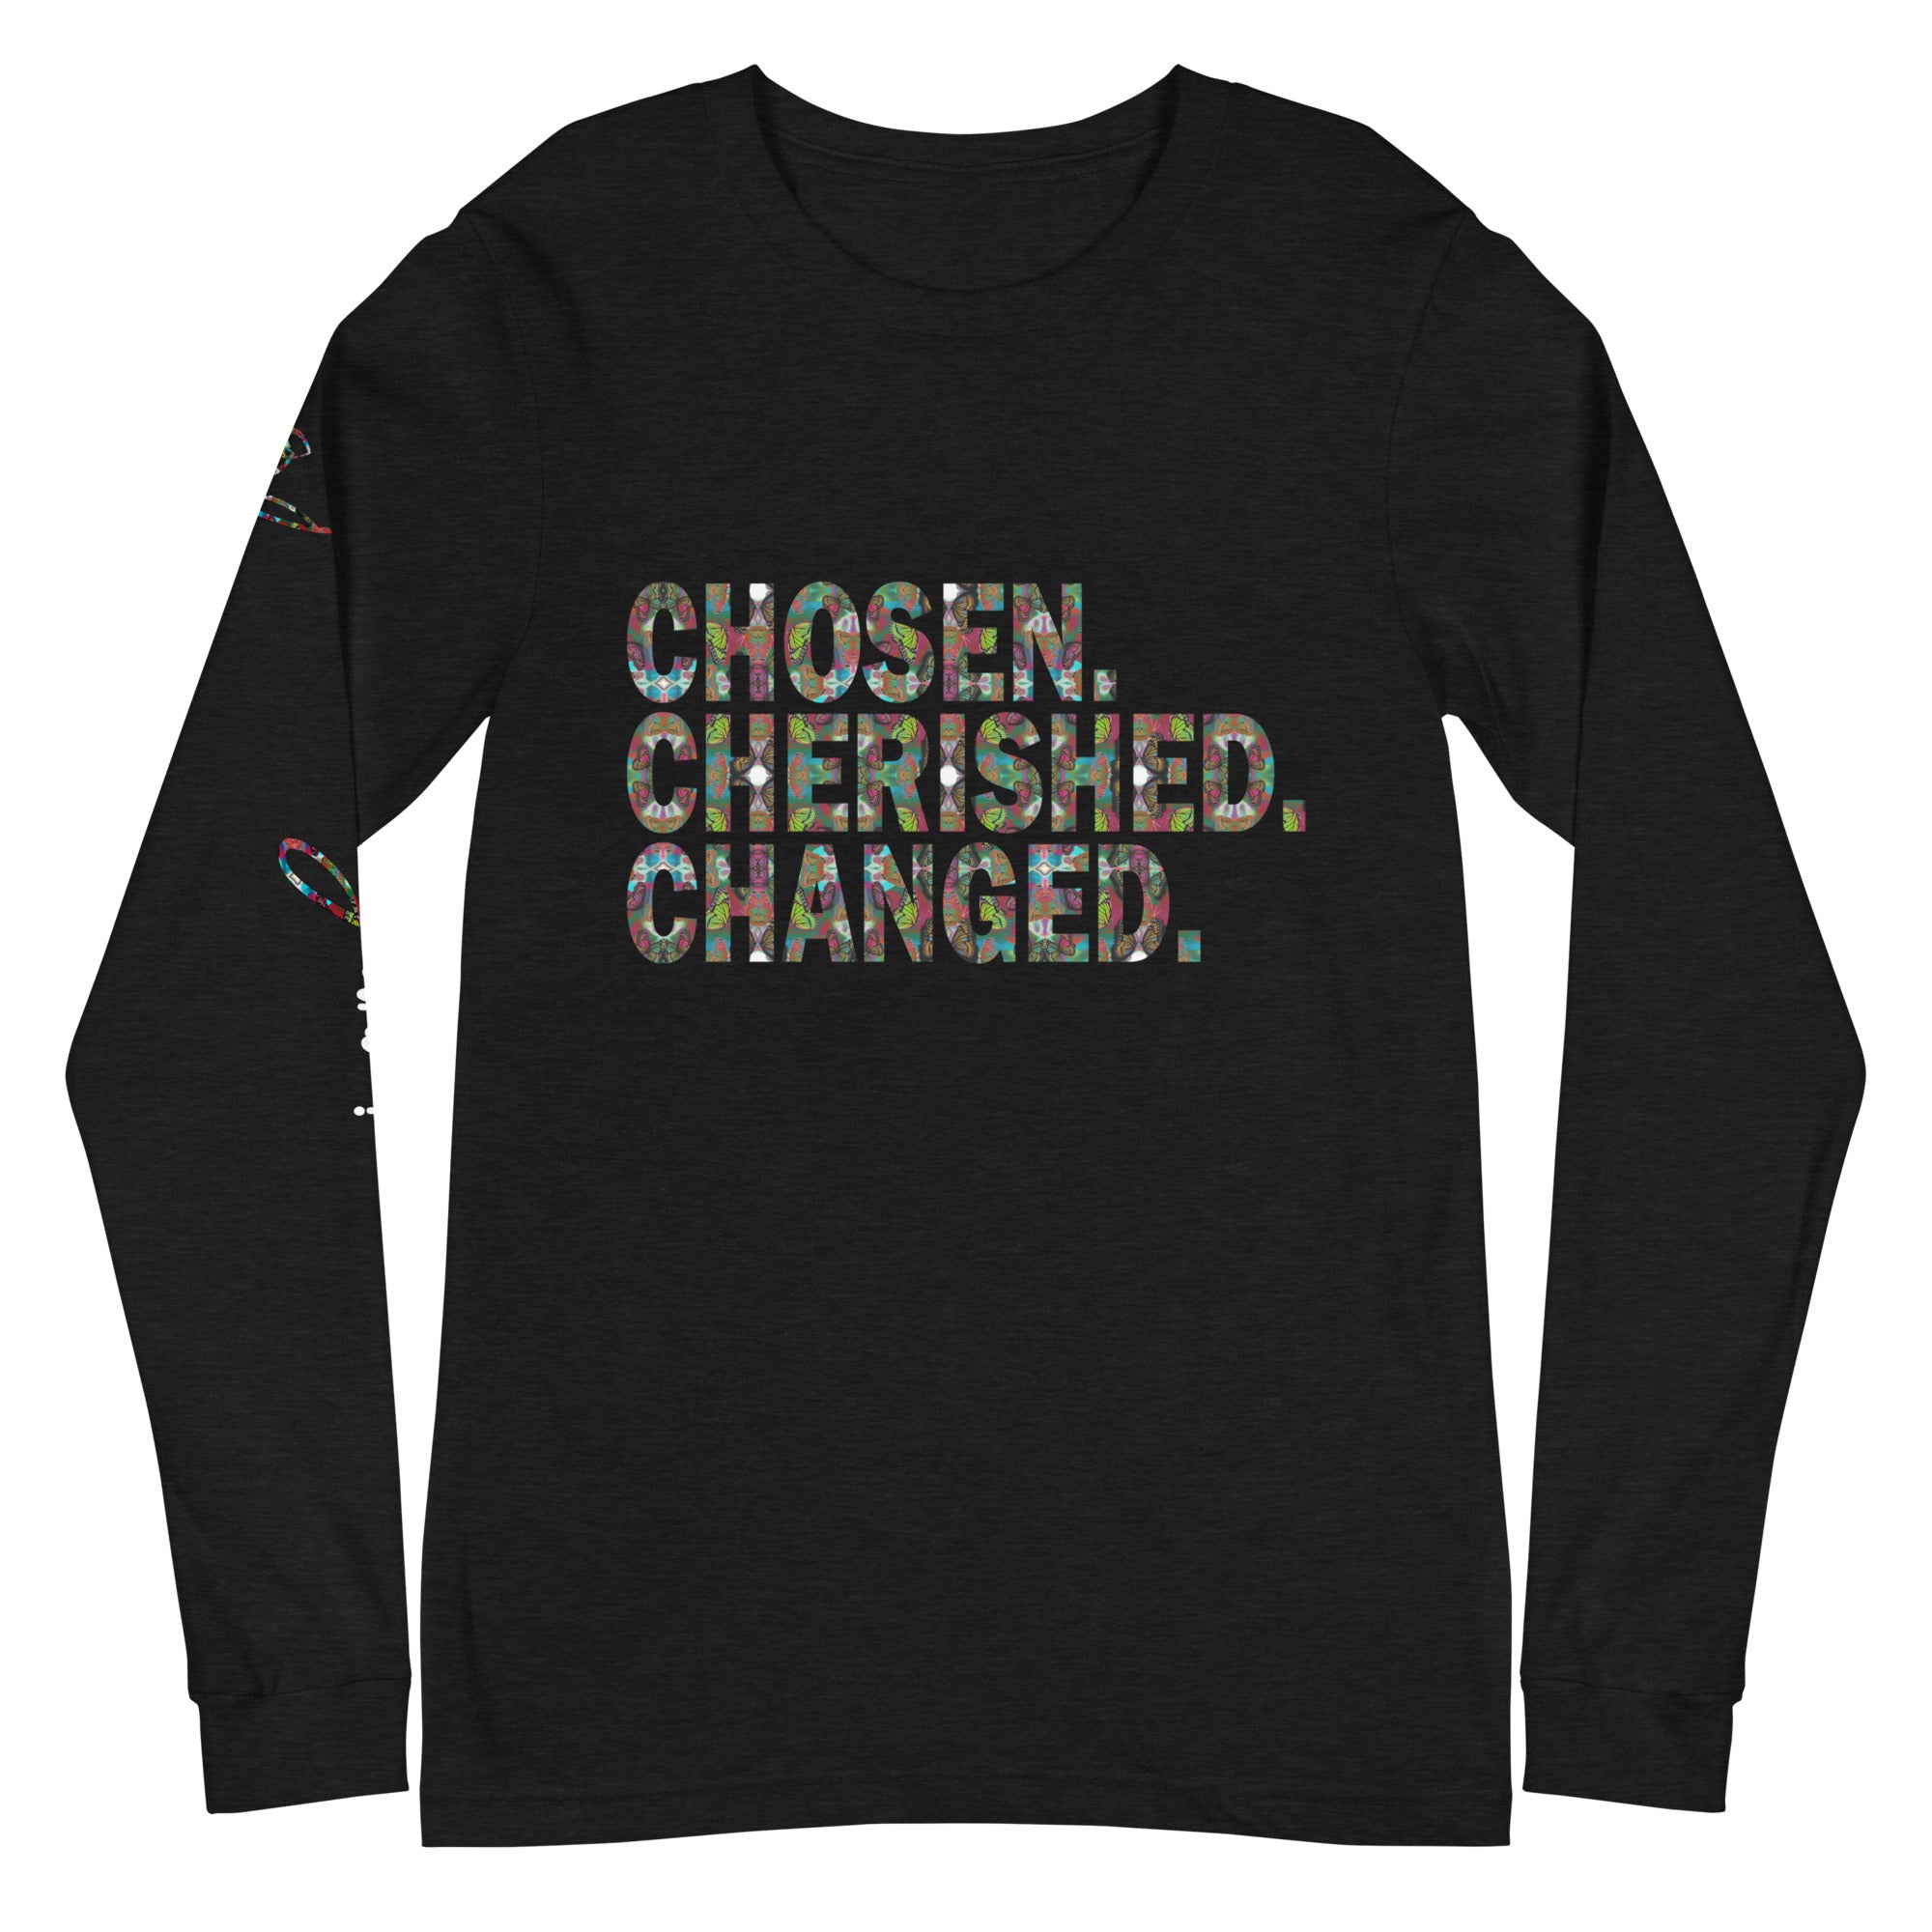 Chosen. Cherished. Changed. Butterfly Word Art Graphic Long Sleeve Tee